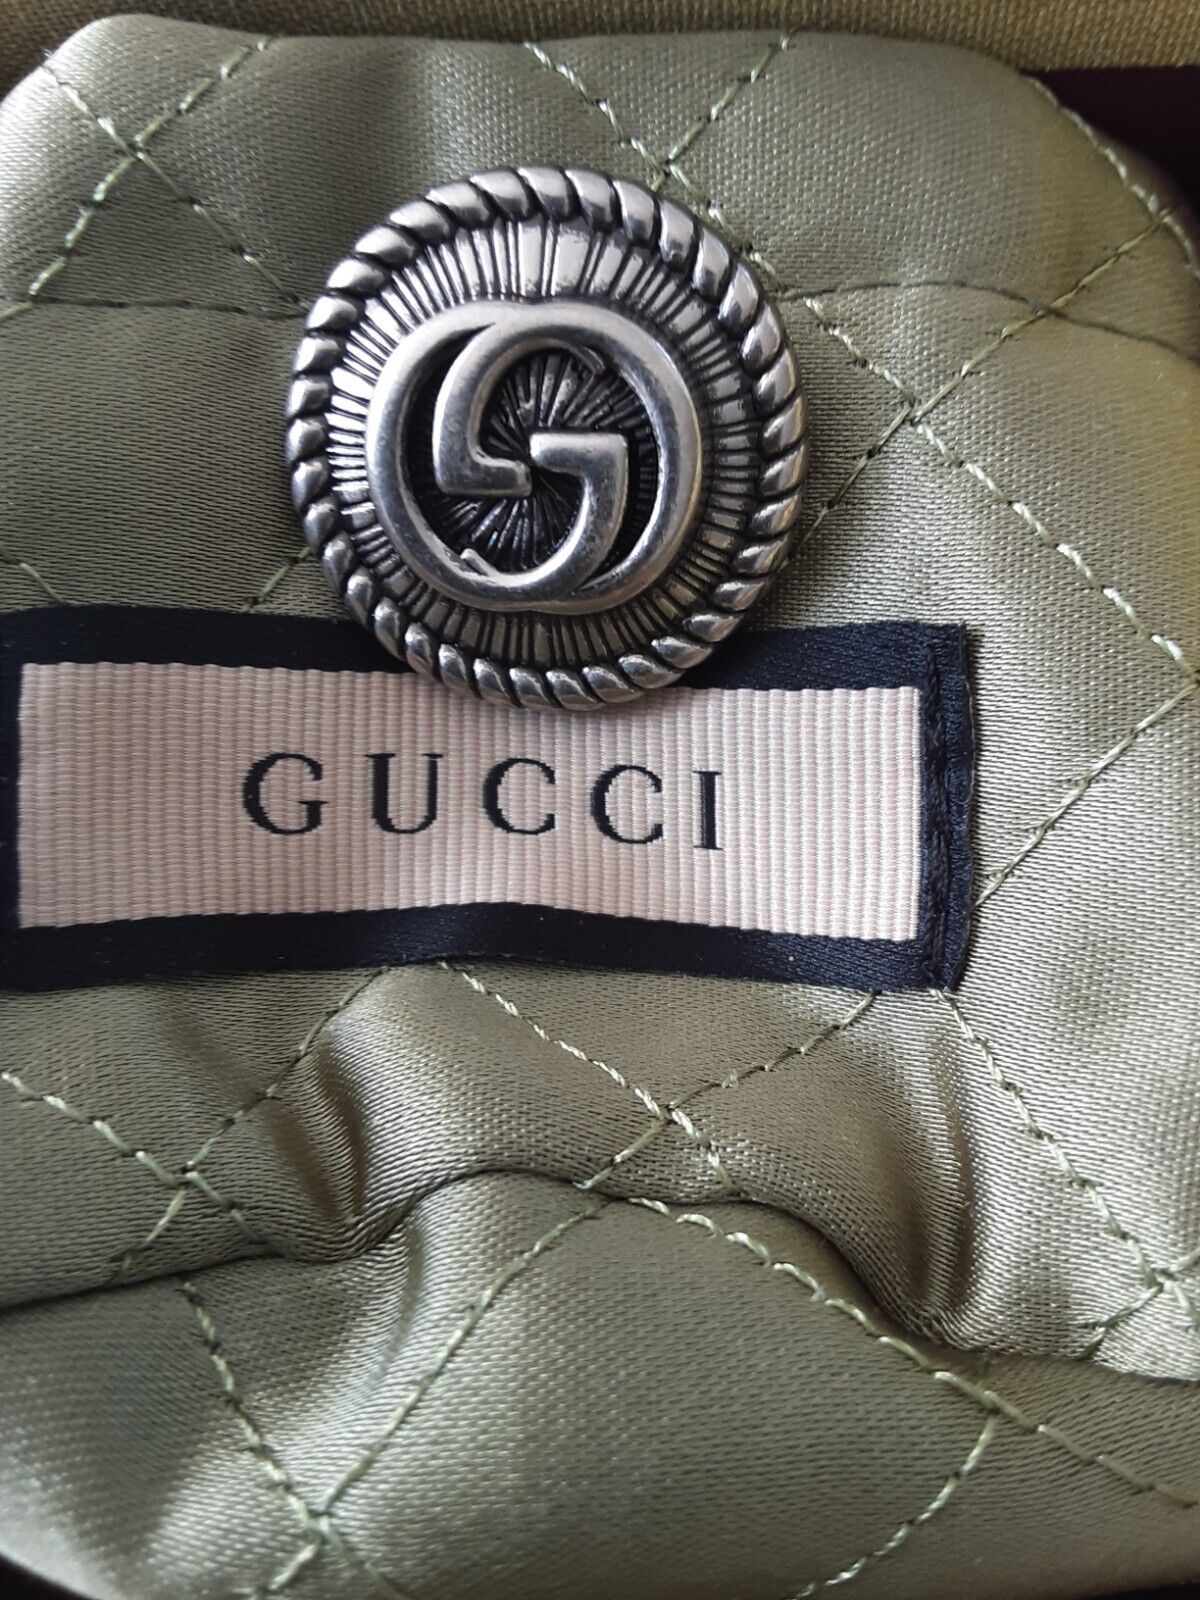 Gucci  button 1 pcs  metal 25 mm 1 inch  metal bees silver